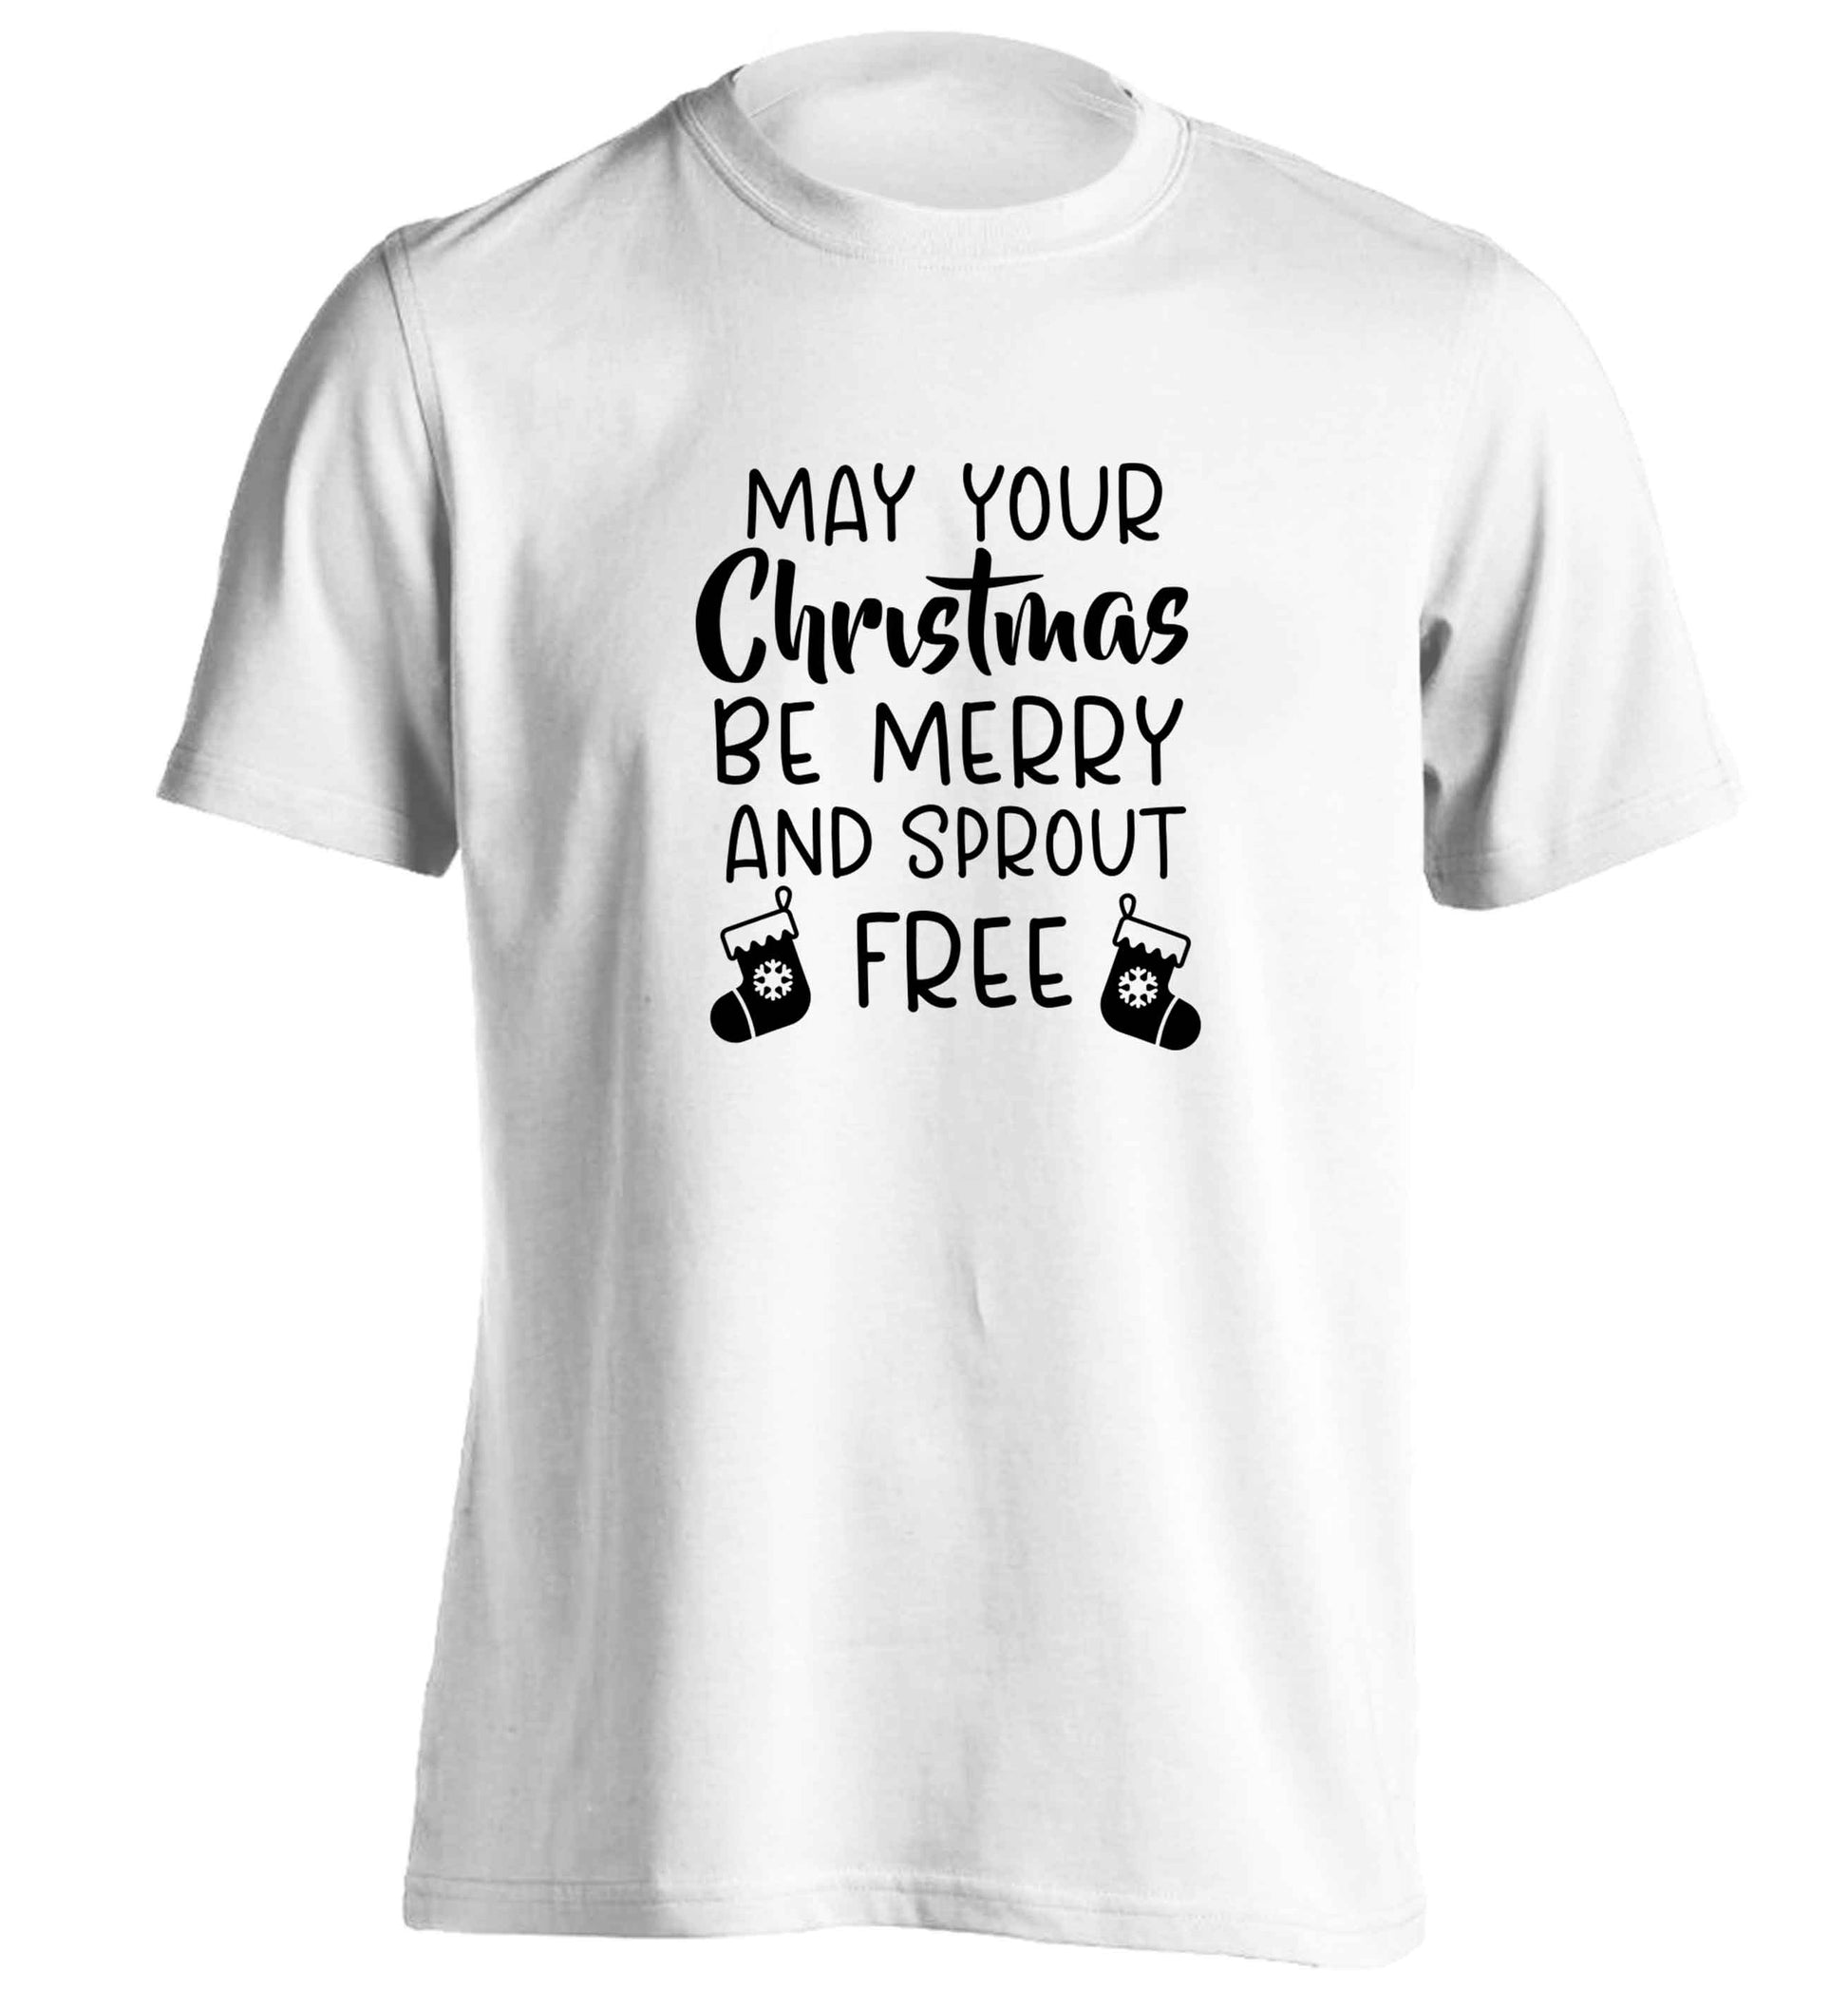 May your Christmas be merry and sprout free adults unisex white Tshirt 2XL